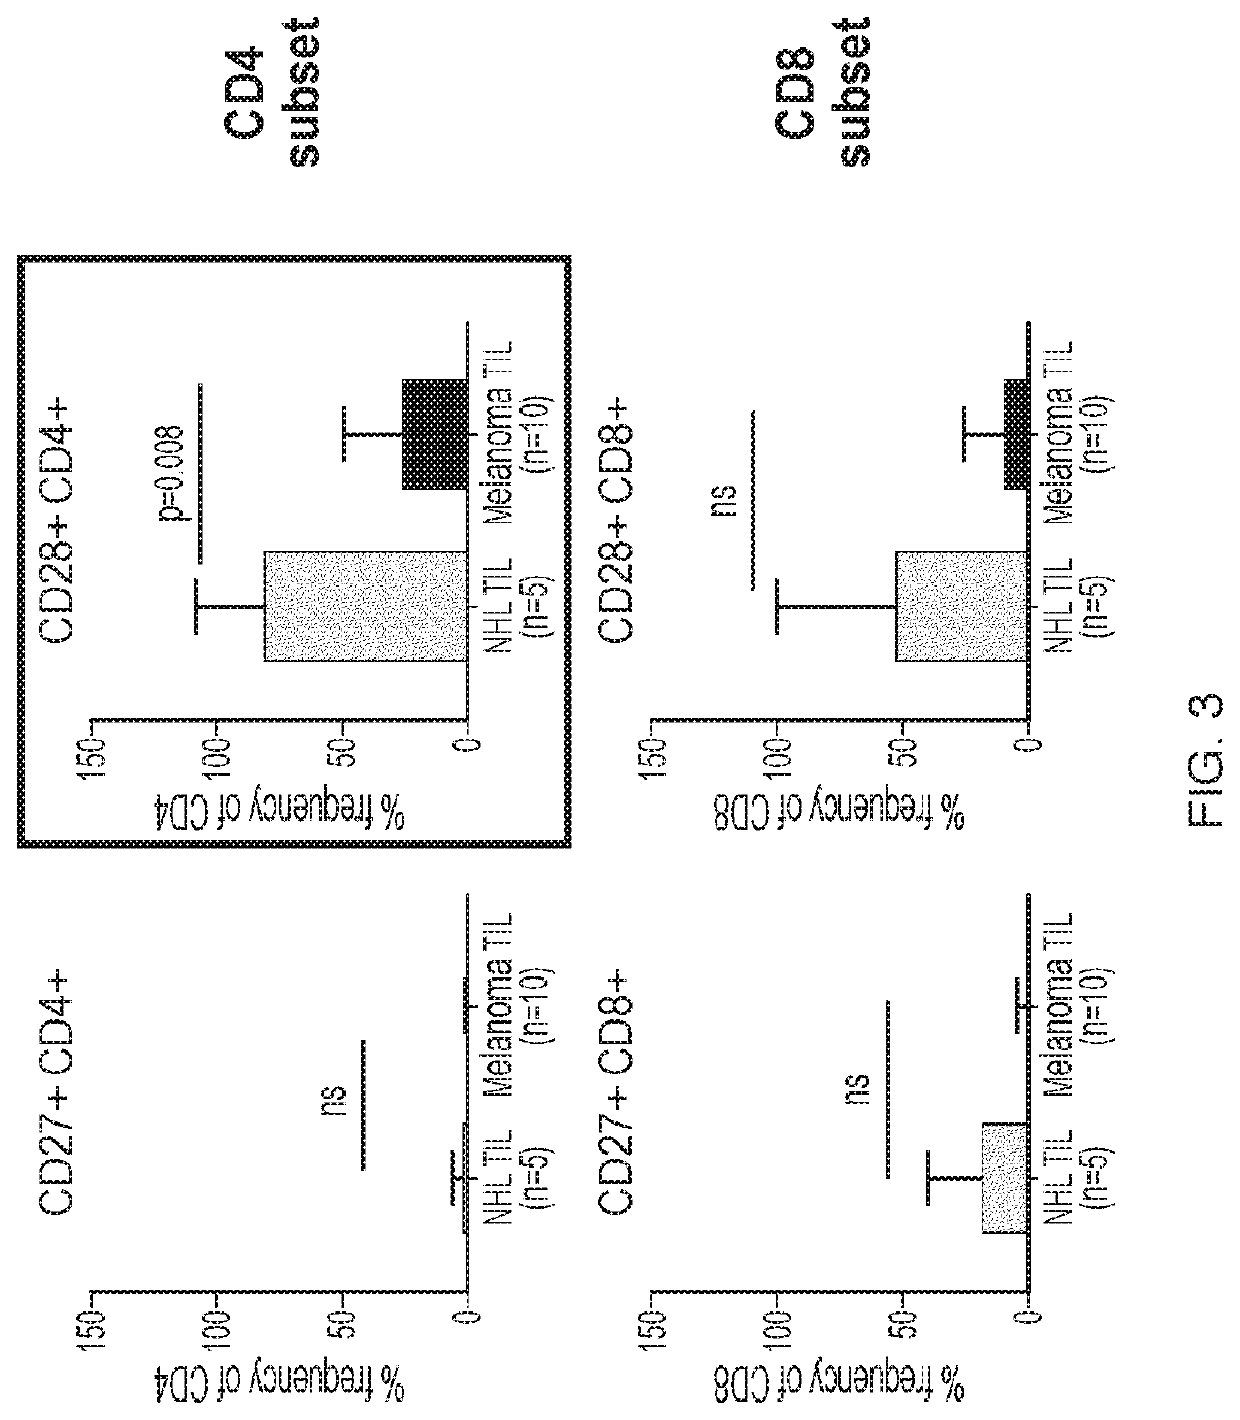 Expansion of tumor infiltrating lymphocytes from liquid tumors and therapeutic uses thereof